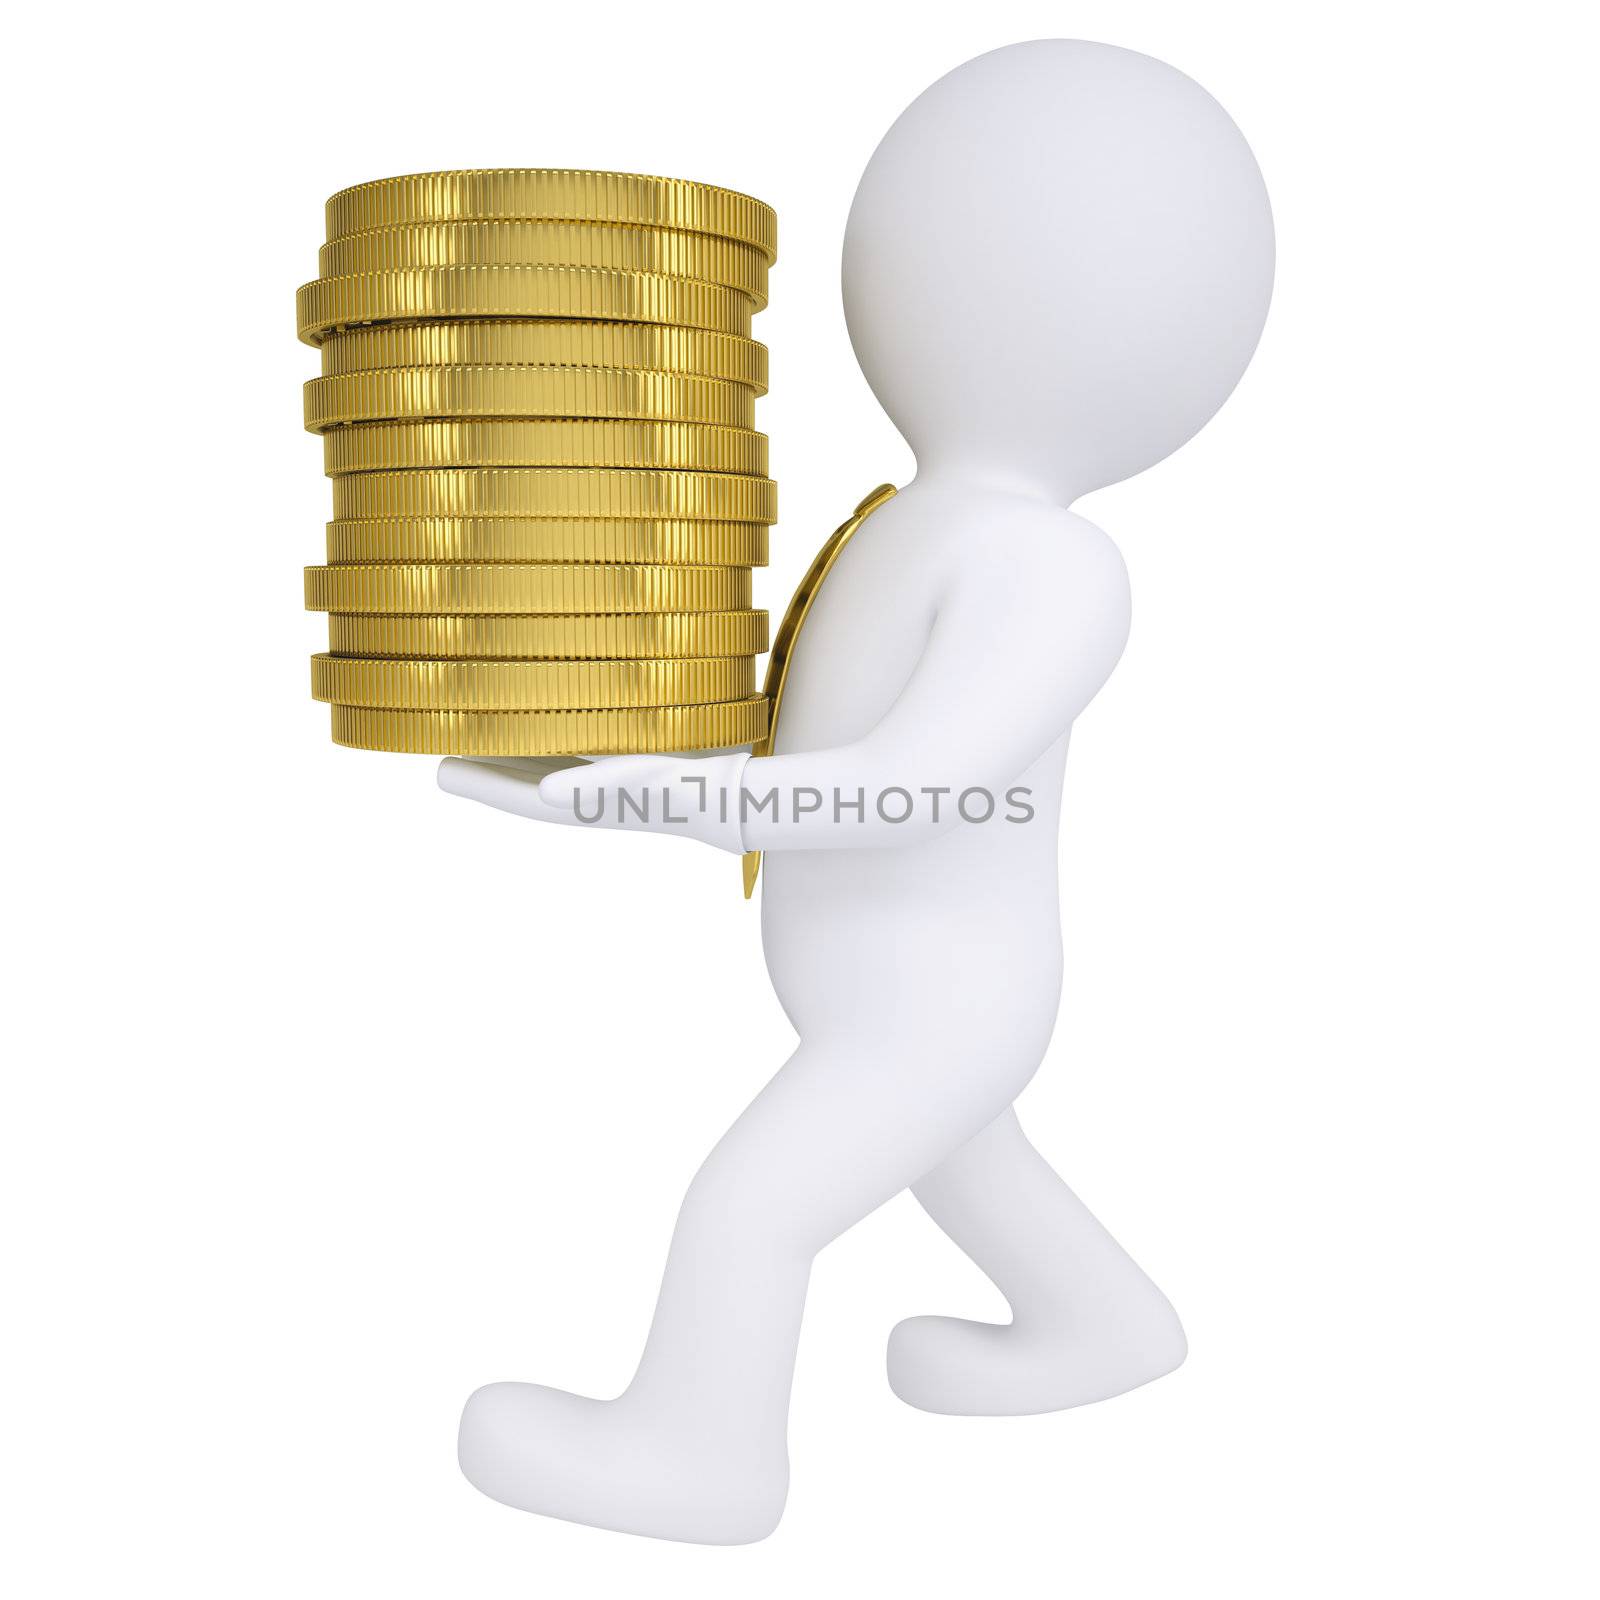 3d man carries a gold coin. Isolated render on a white background